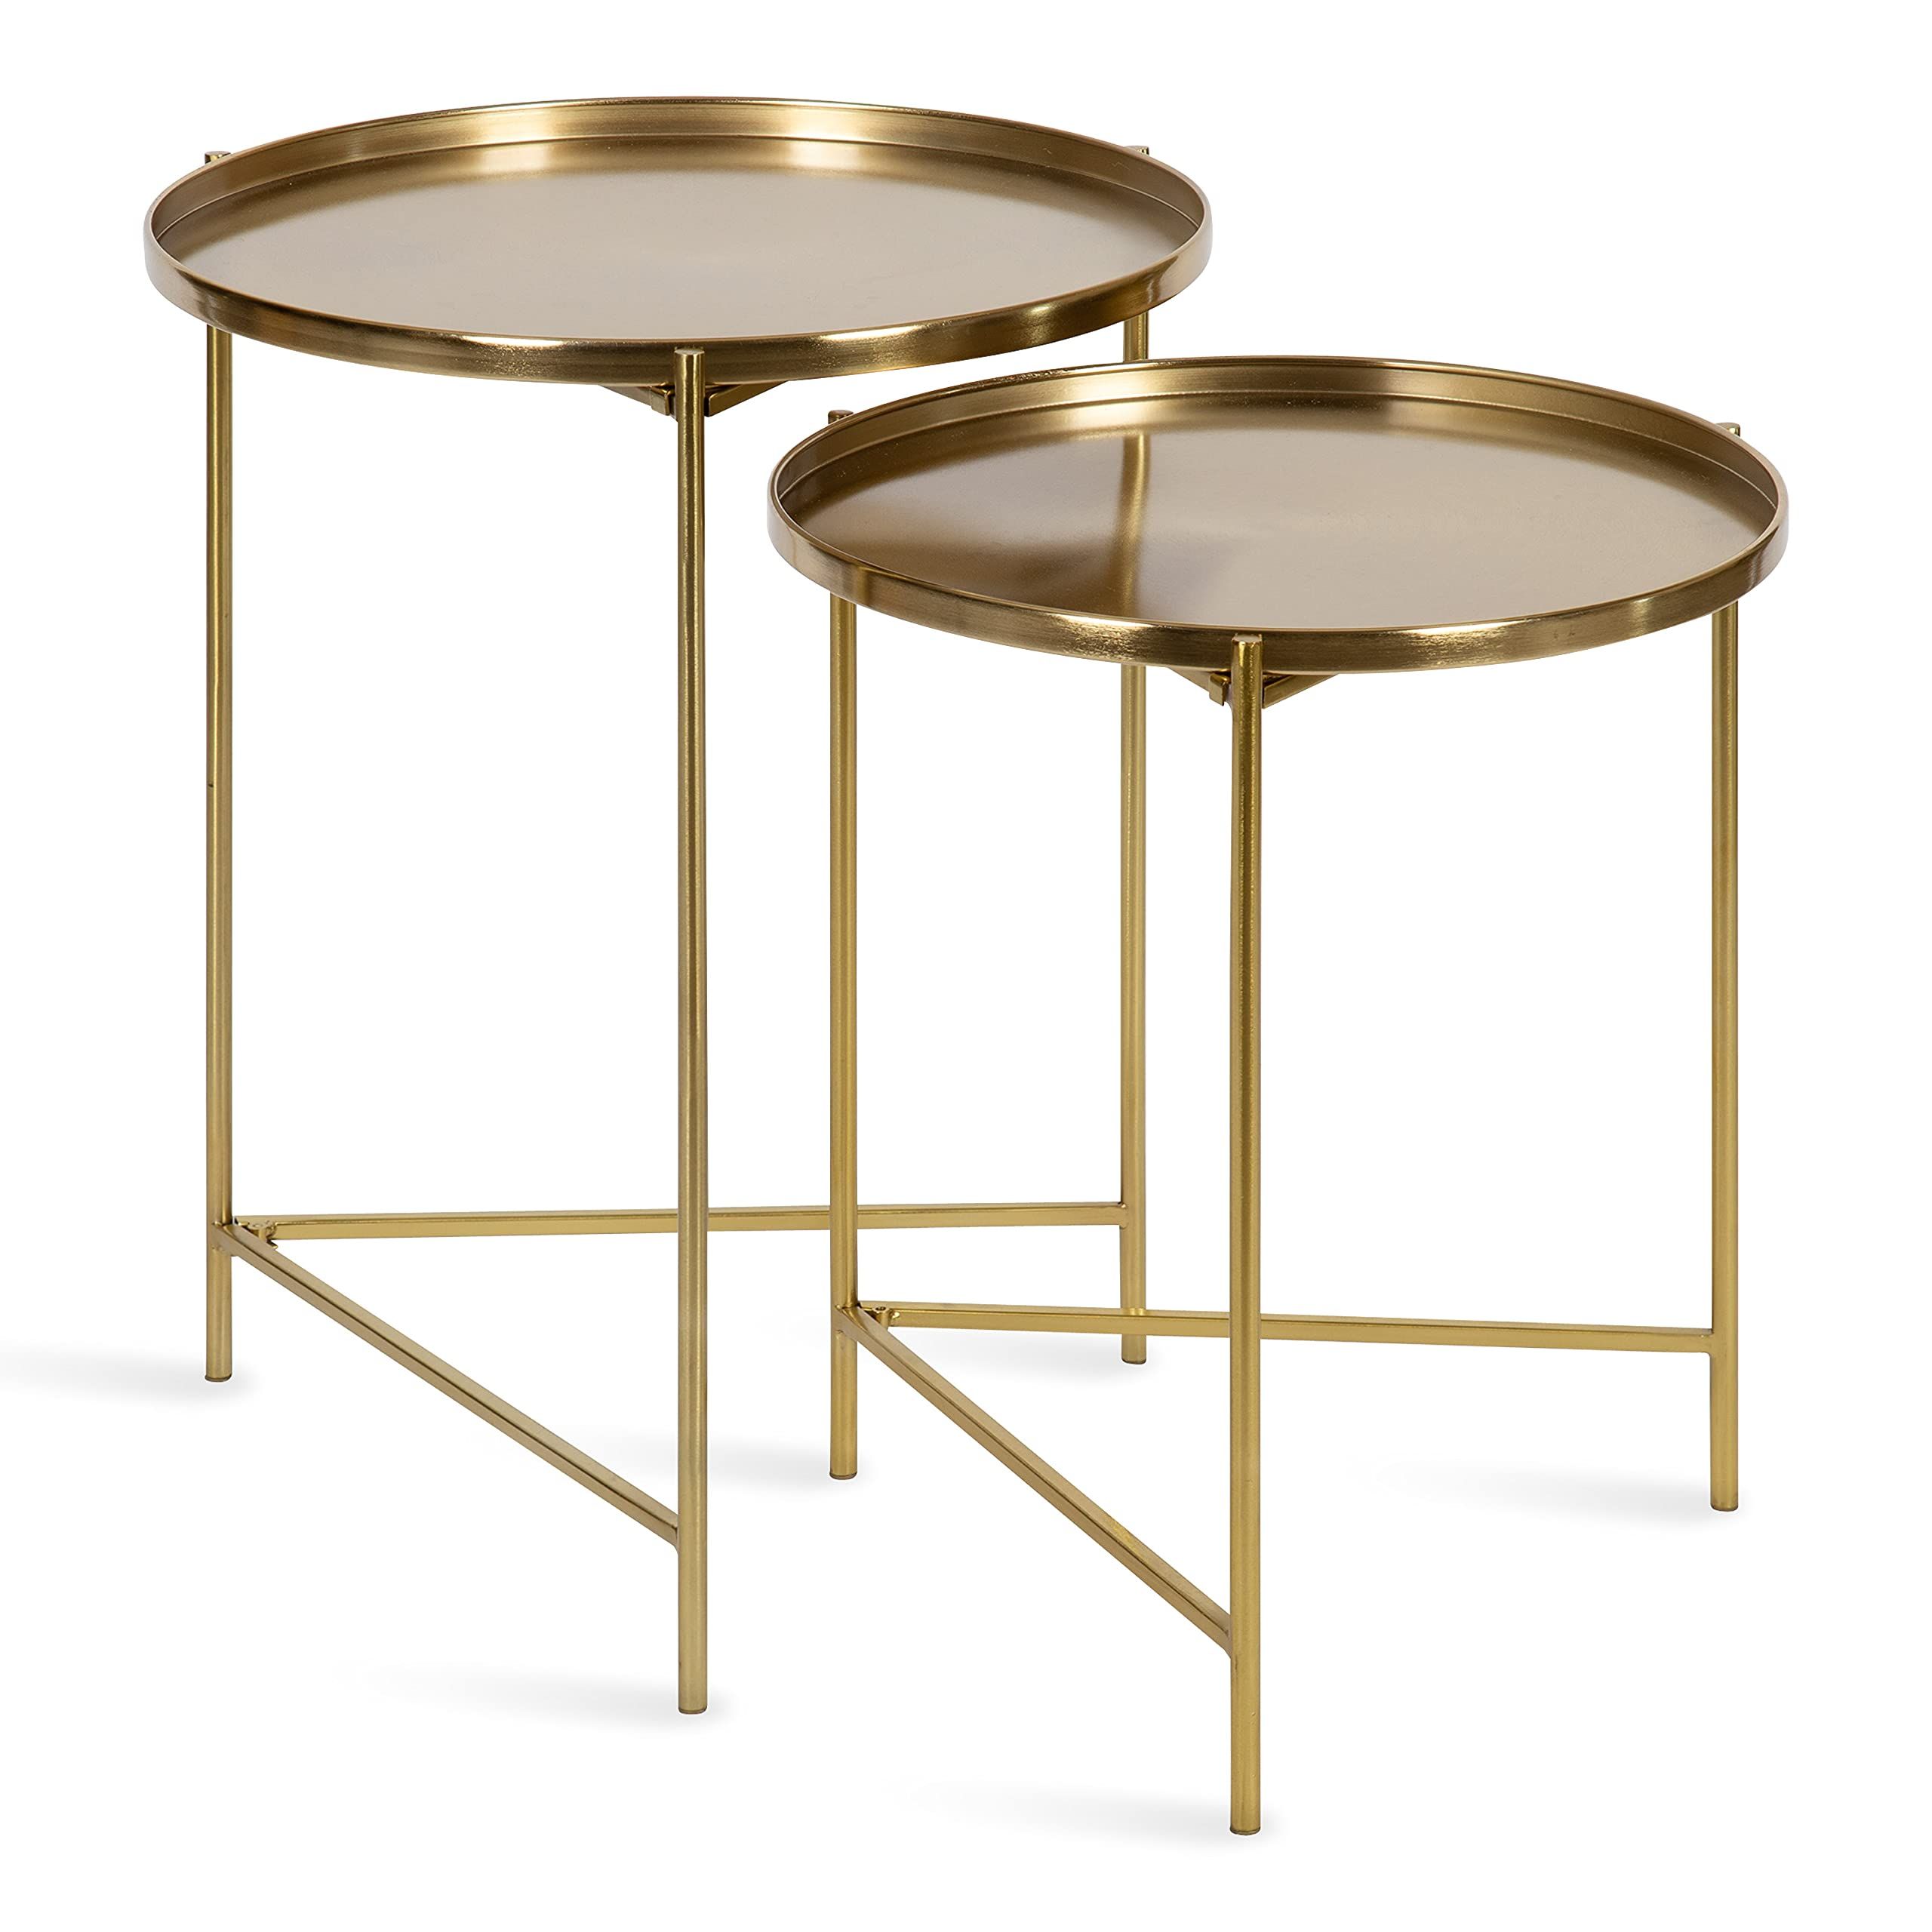 Kate and Laurel Ulani Round Metal Accent Tables, 2 Piece, Gold | Amazon (US)